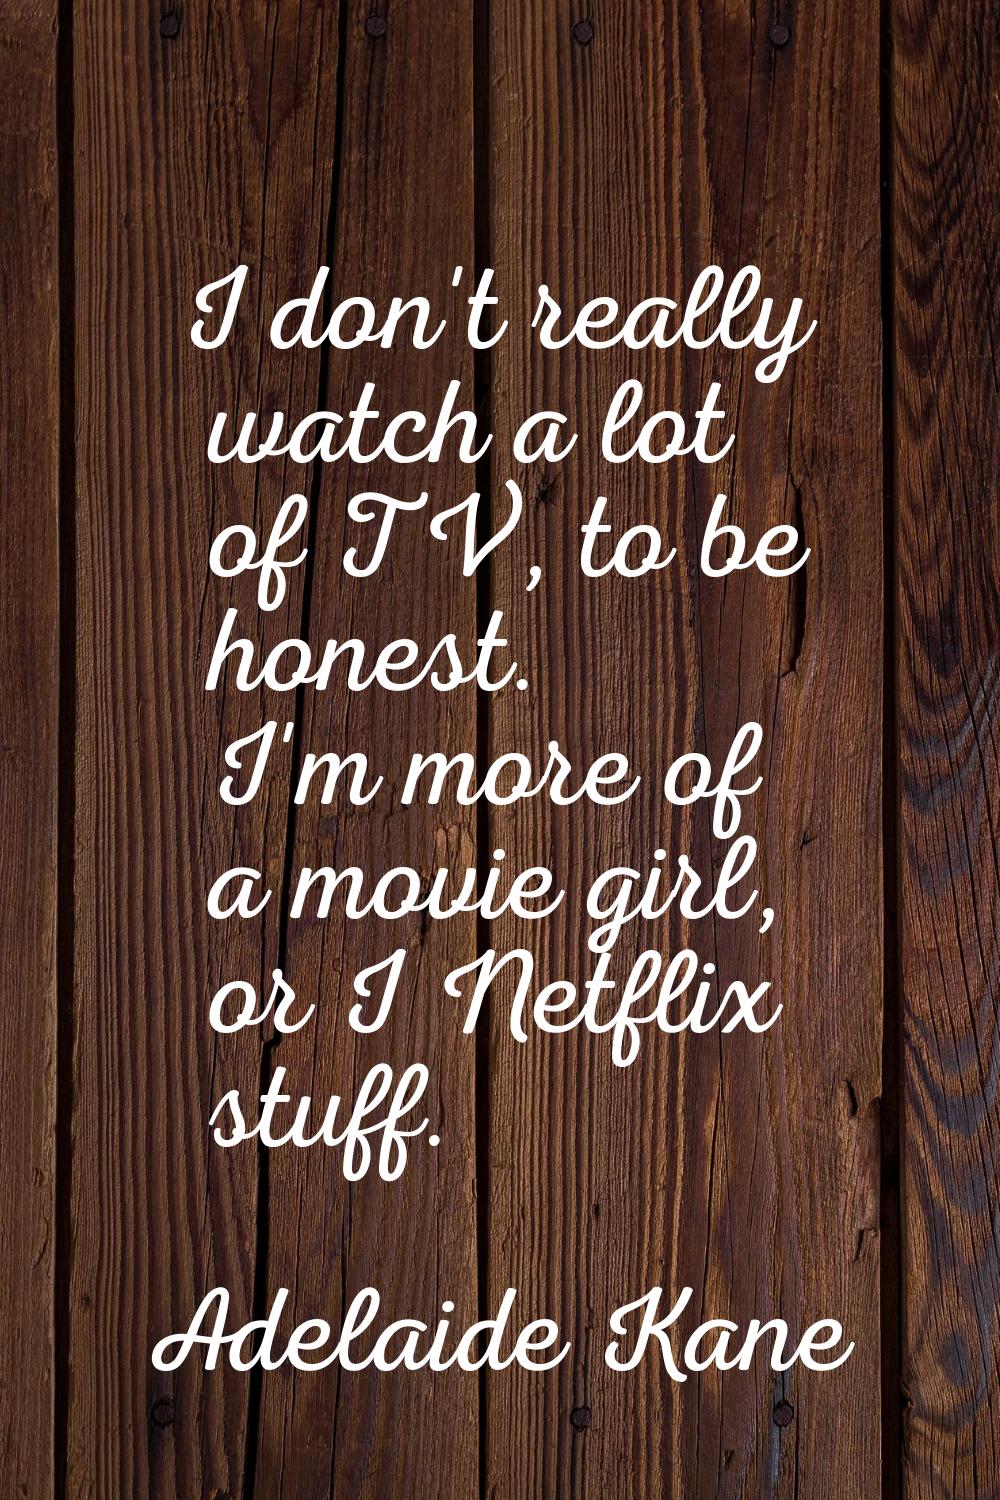 I don't really watch a lot of TV, to be honest. I'm more of a movie girl, or I Netflix stuff.